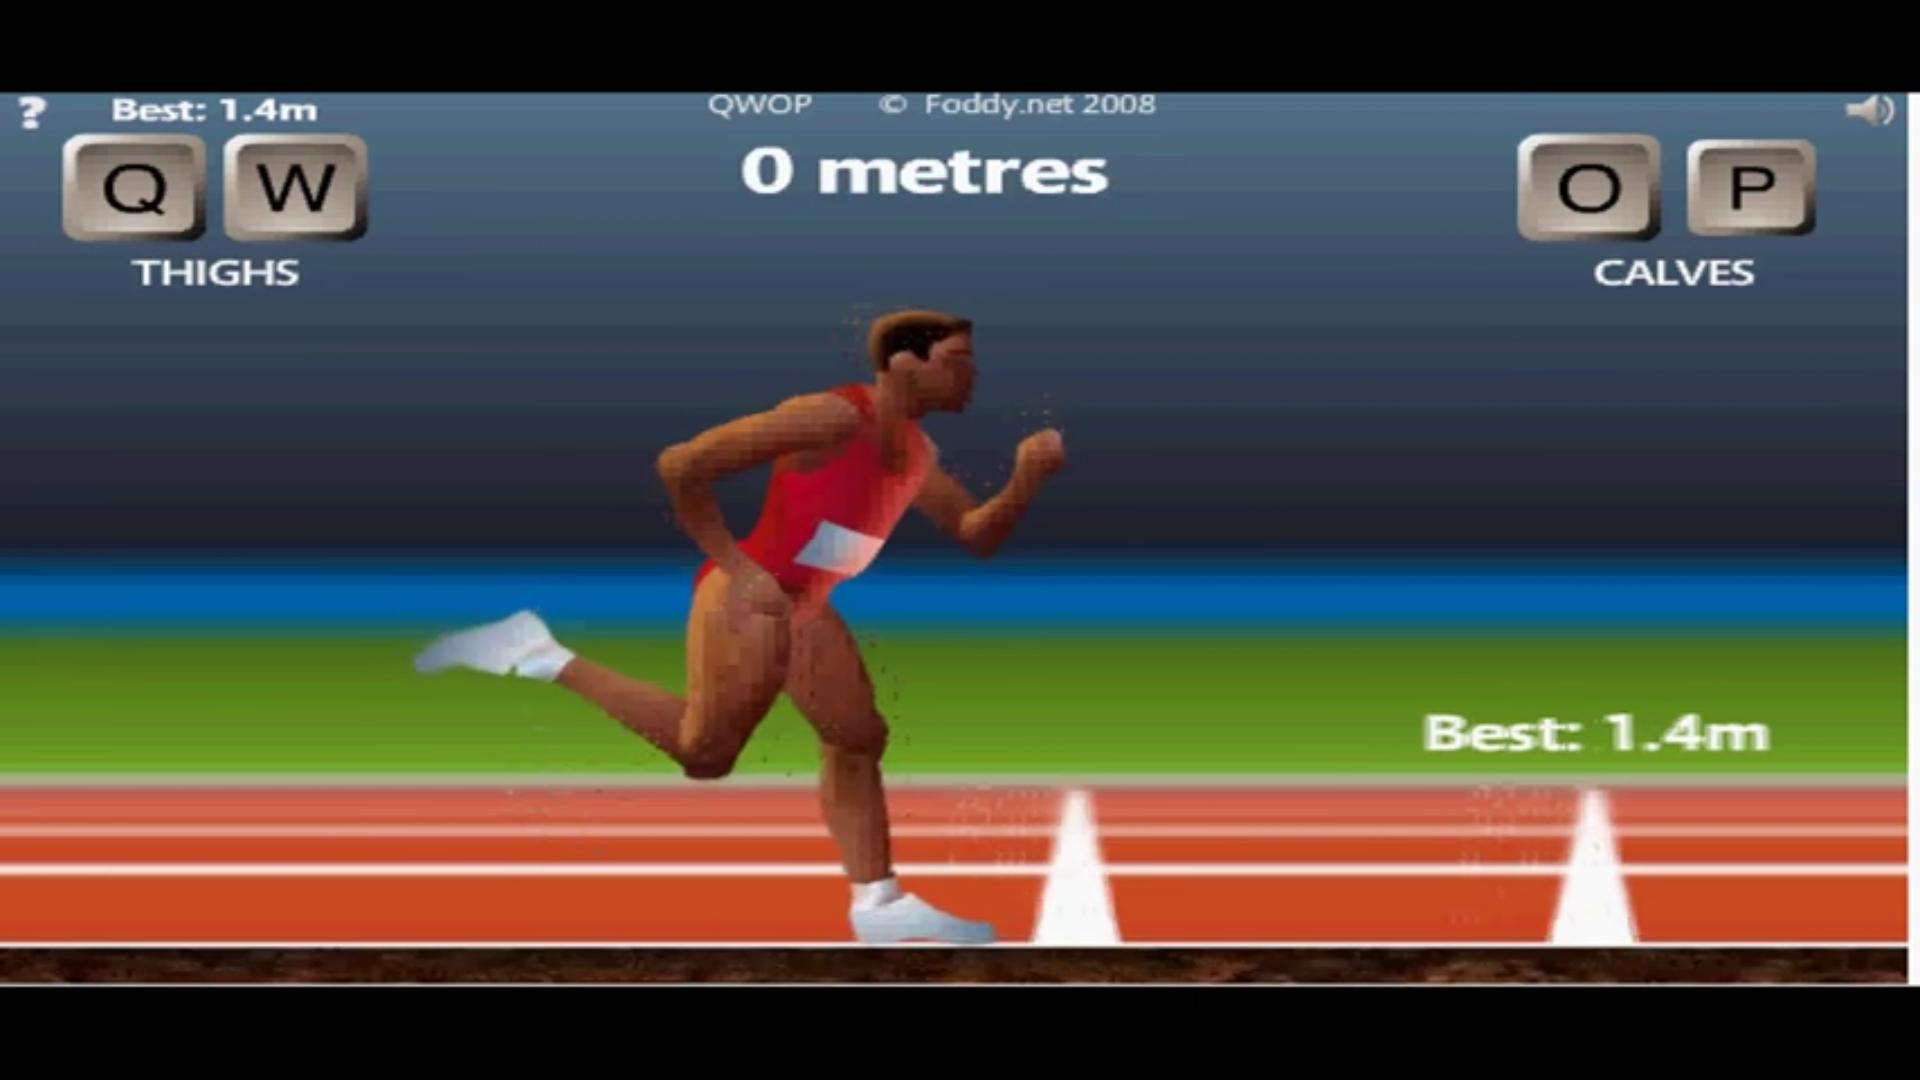 Play Qwop Speedrun Cours Game All Tricks For Android Apk Download